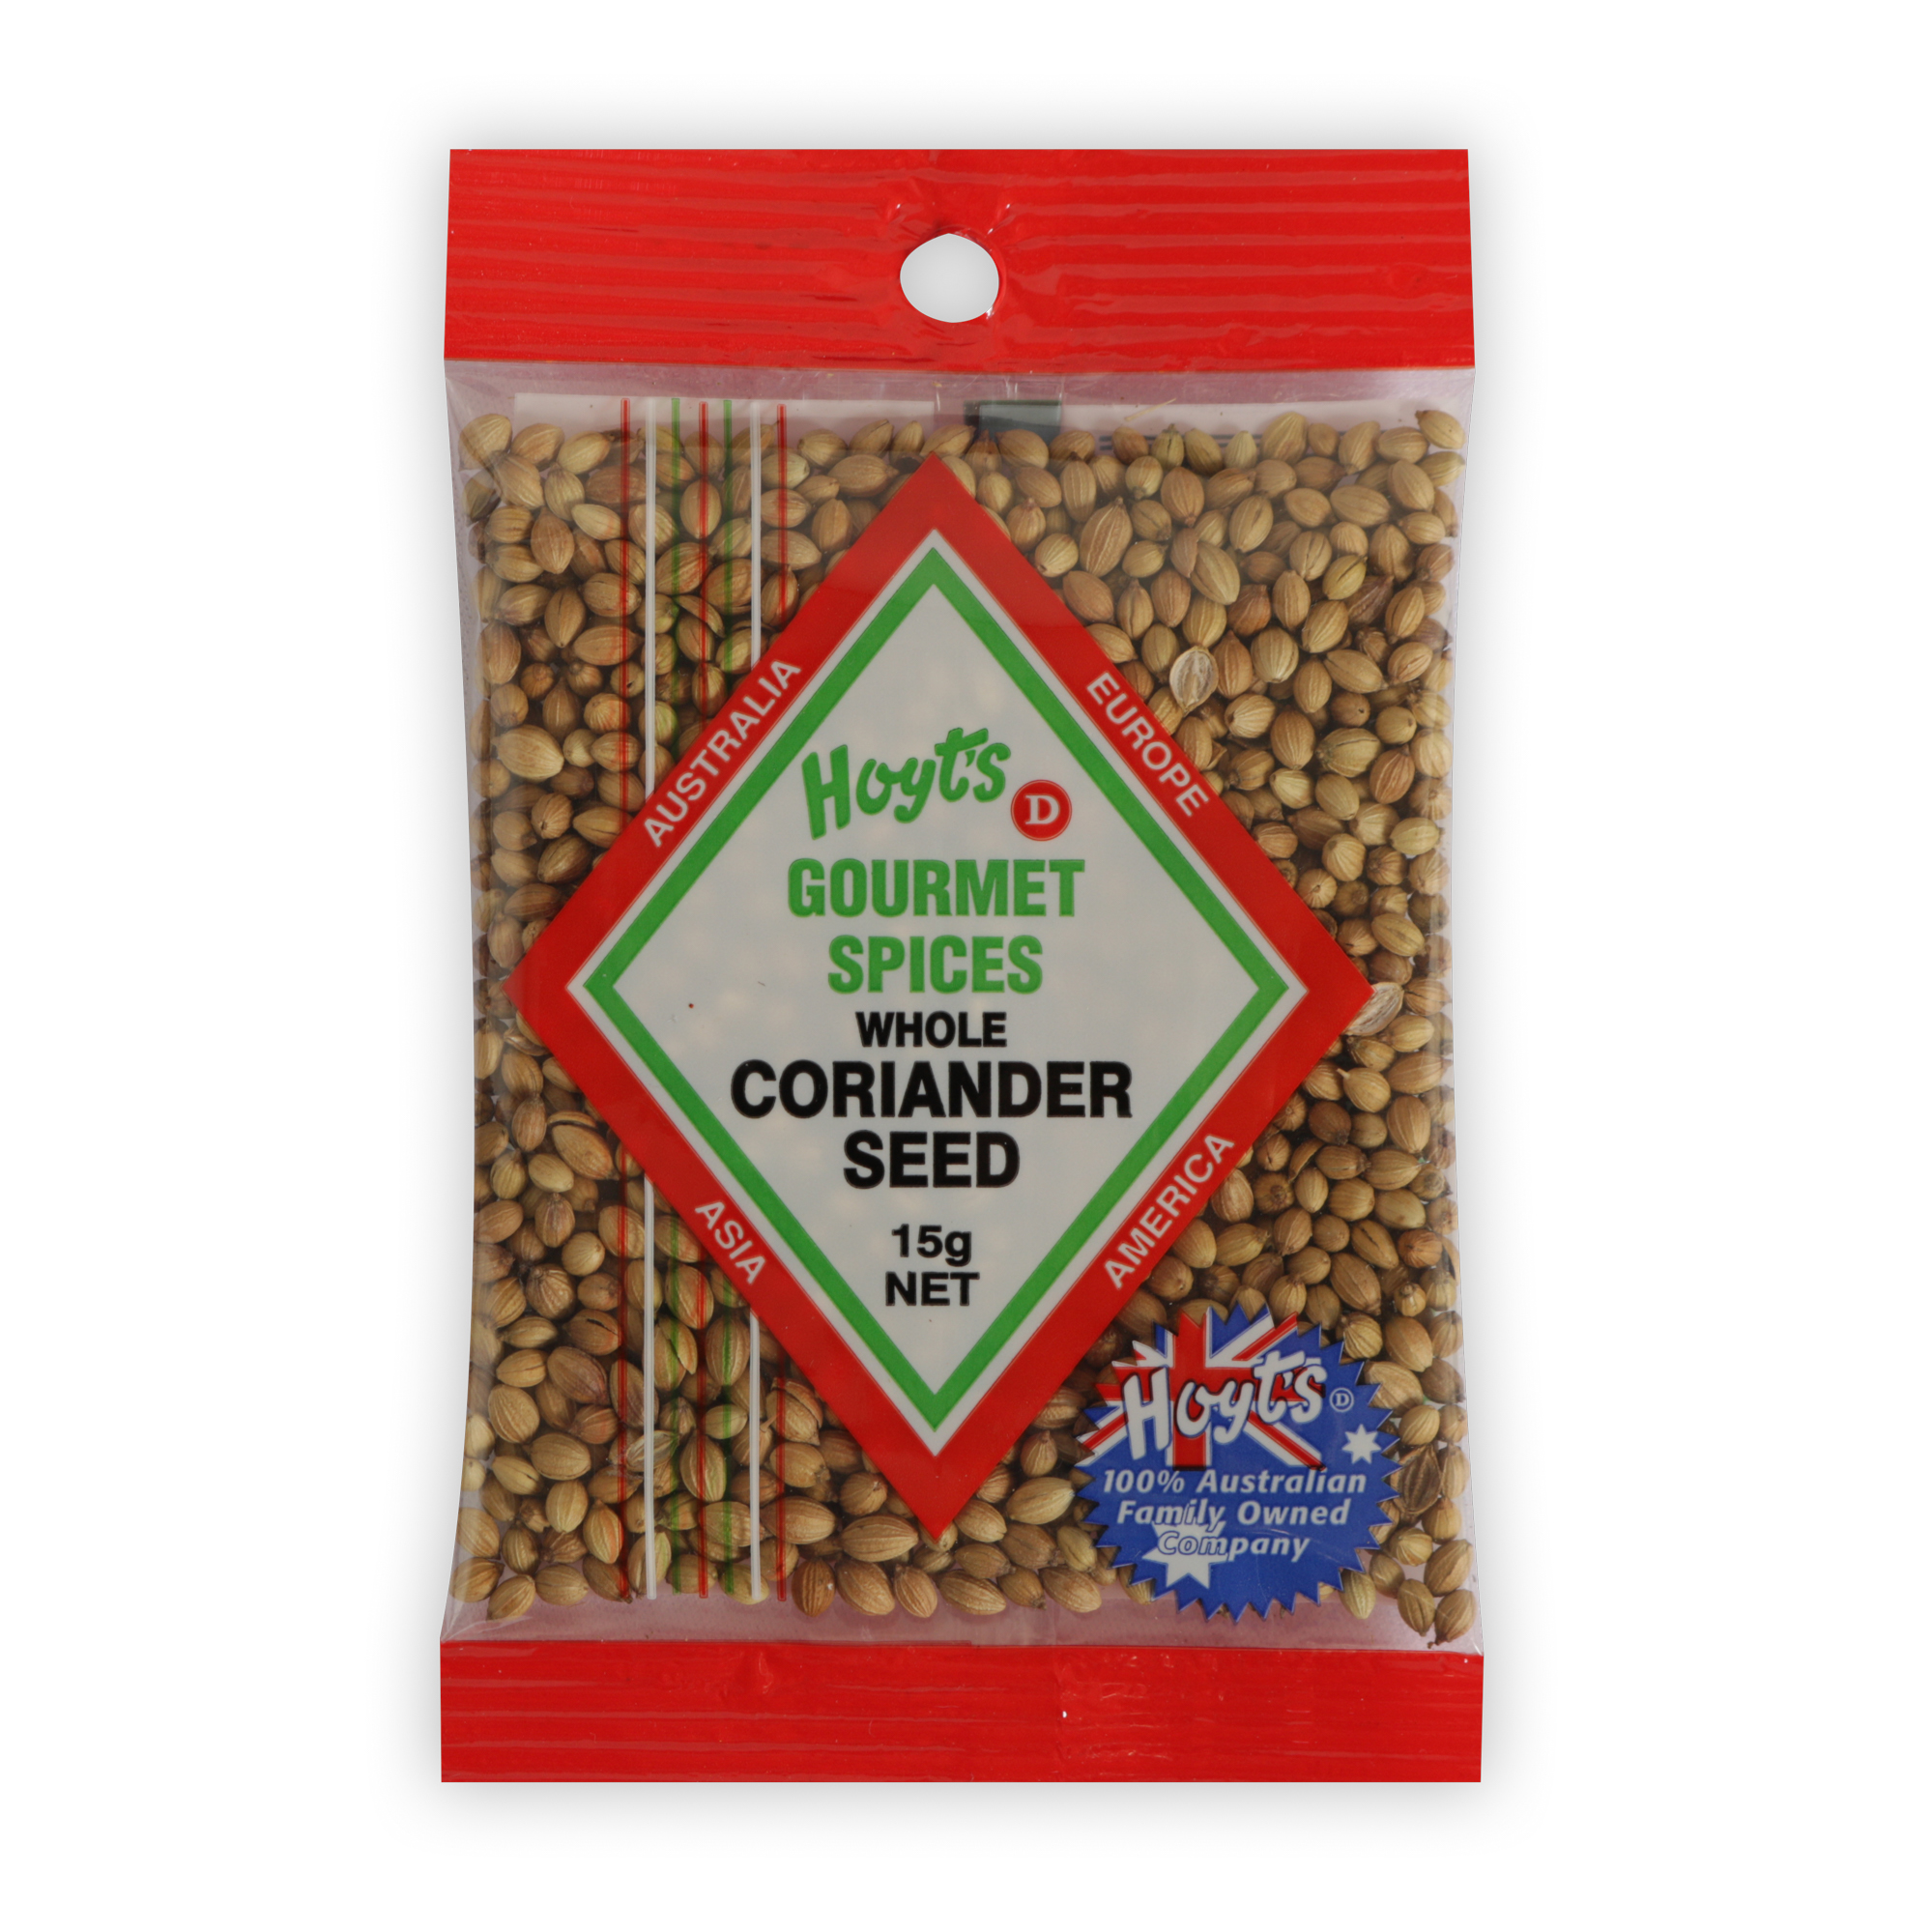 Gourmet Coriander Seed Whole 15g - 9300725010164 1